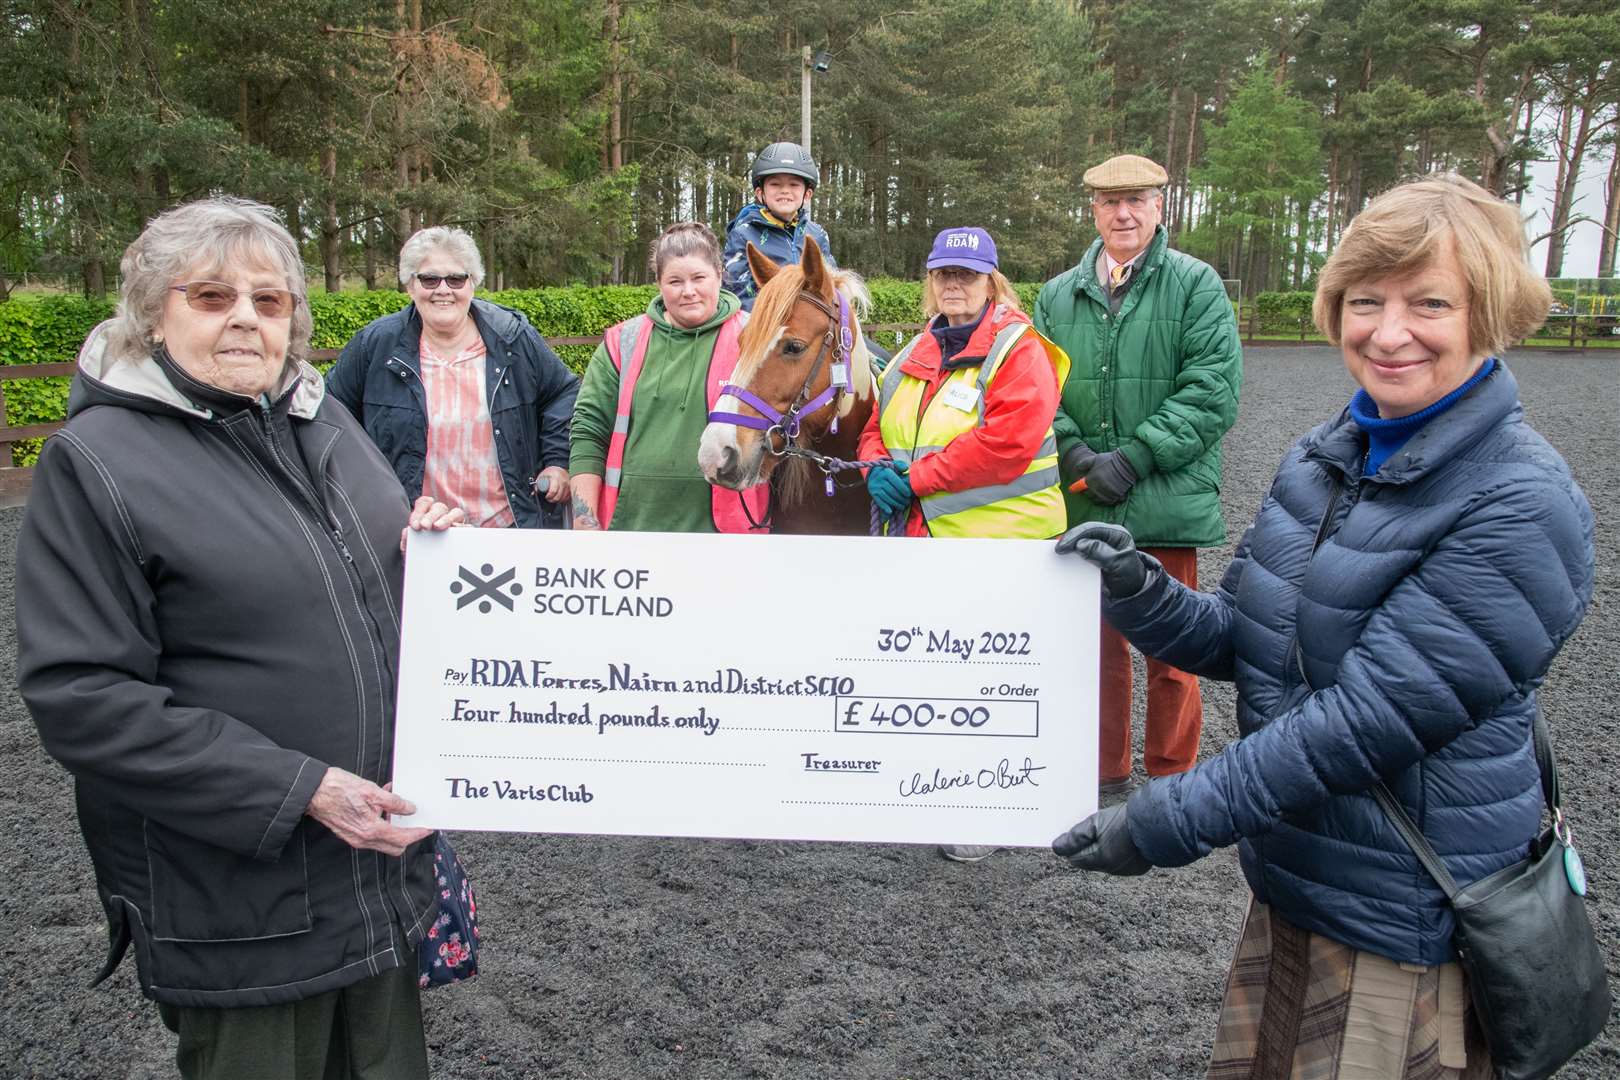 Valerie Burt, Carolyn Pitstra, Michelle Lucas, Allan on pony Lucy, Alice Sutherland, Michael Thompson and Sheila Thompson. Picture: Daniel Forsyth